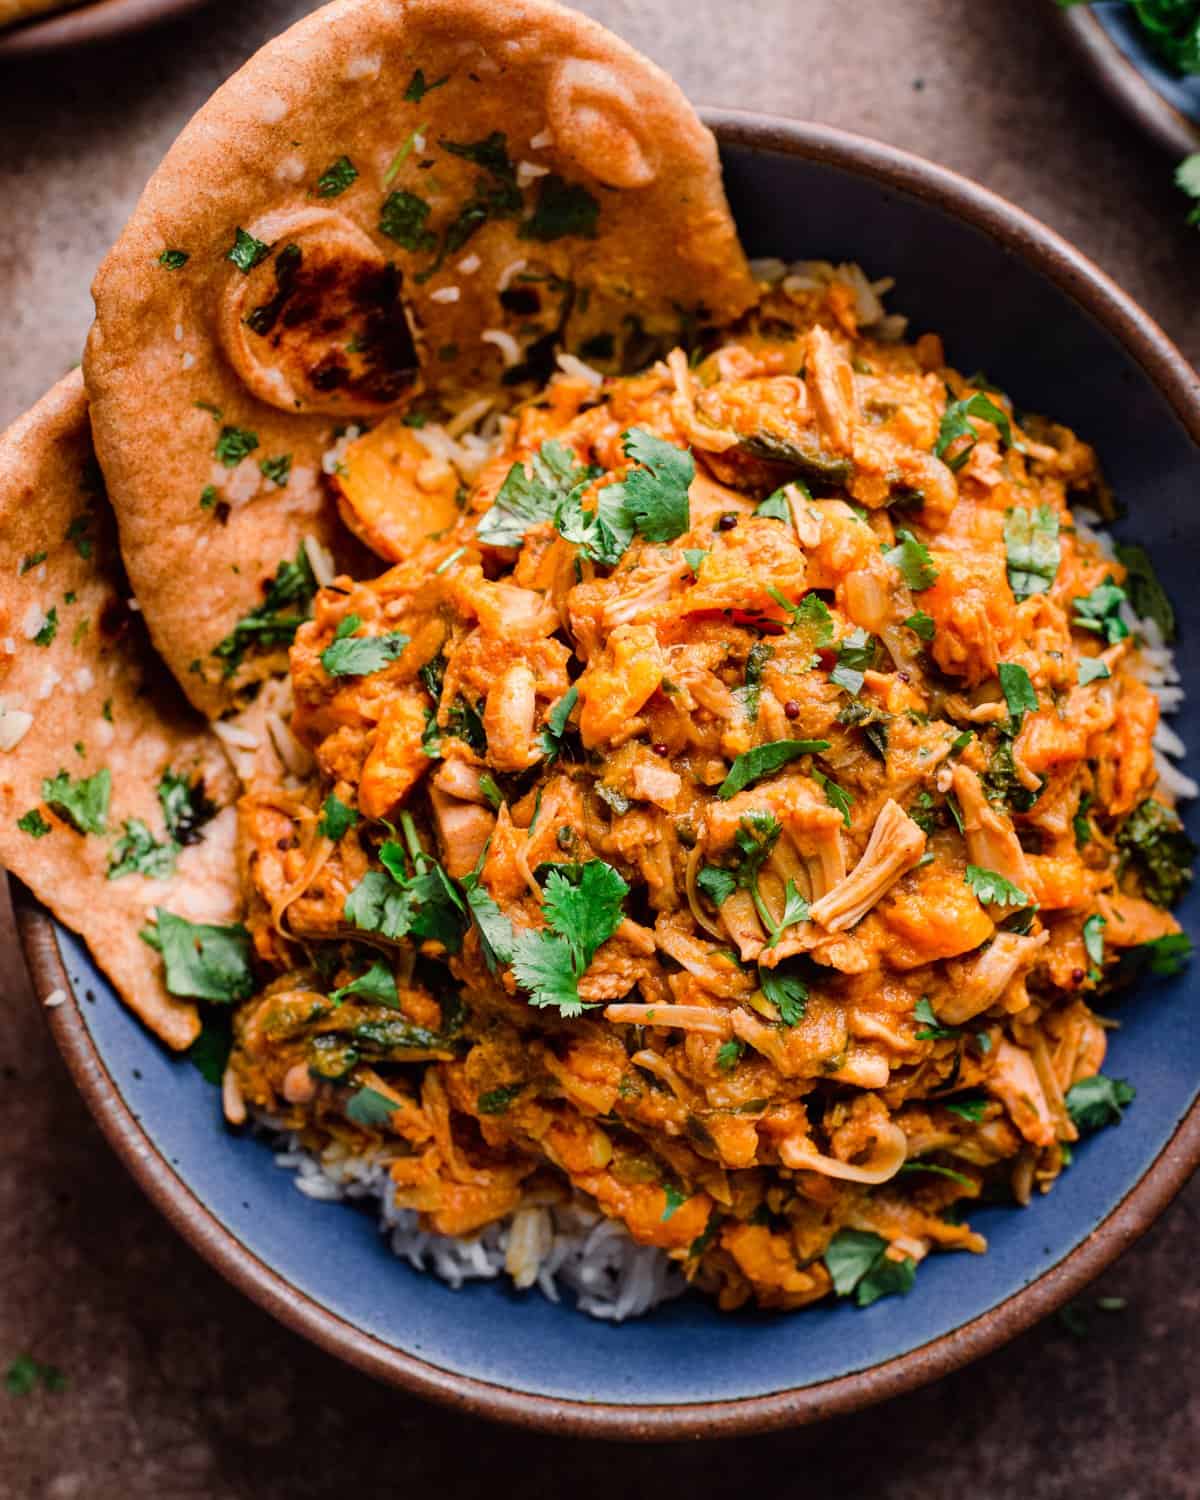 vegan jackfruit curry over rice in blue bowl with whole wheat naan